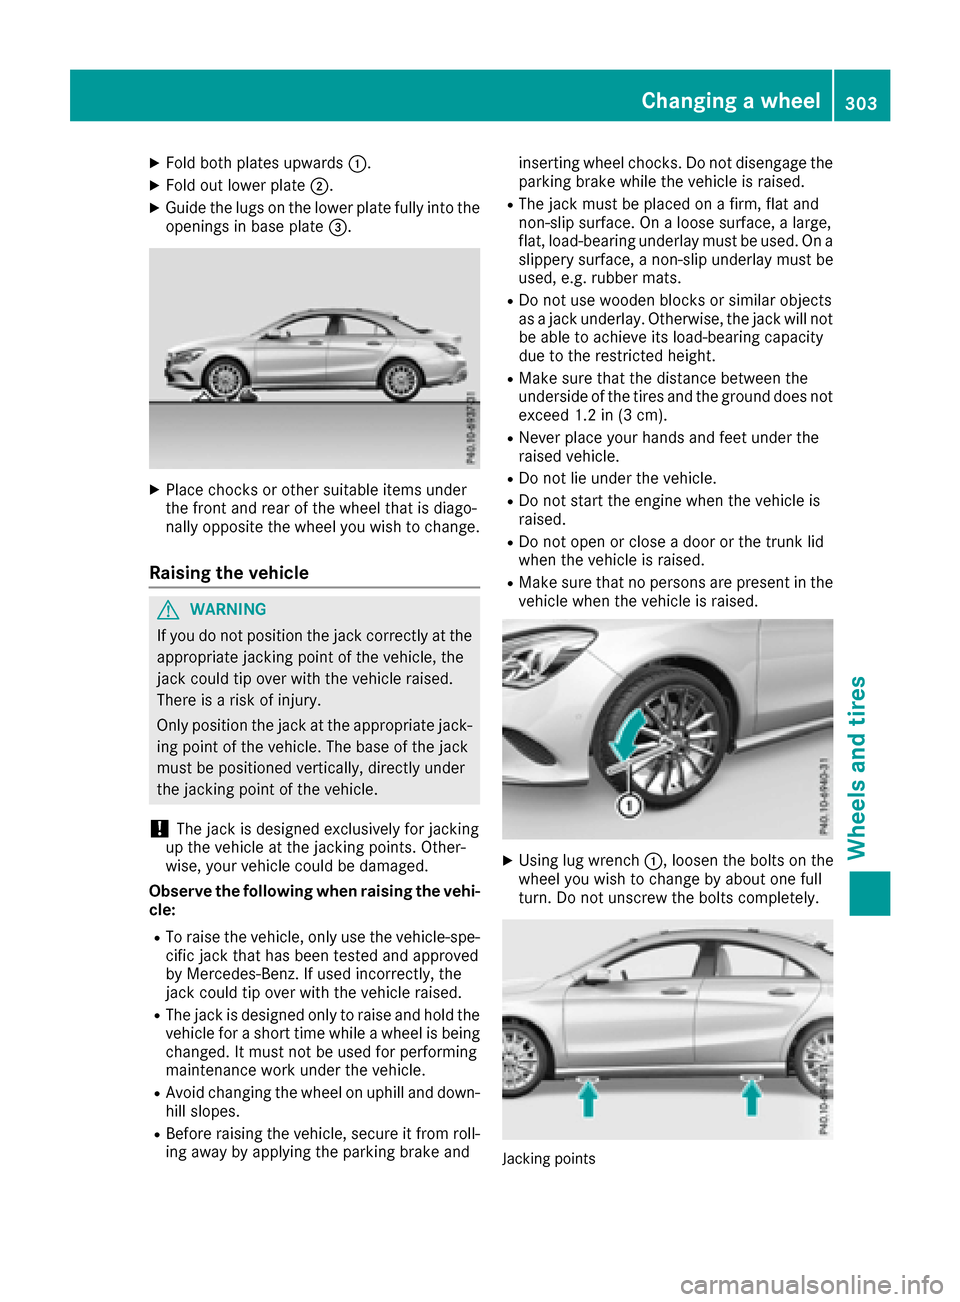 MERCEDES-BENZ CLA-Class 2017 C117 Owners Manual XFold both plates upwards:.
XFold out lower plate;.
XGuide the lugs on the lower plate fully into the
openings in base plate =.
XPlace chocks or other suitable items under
the front and rear of the wh